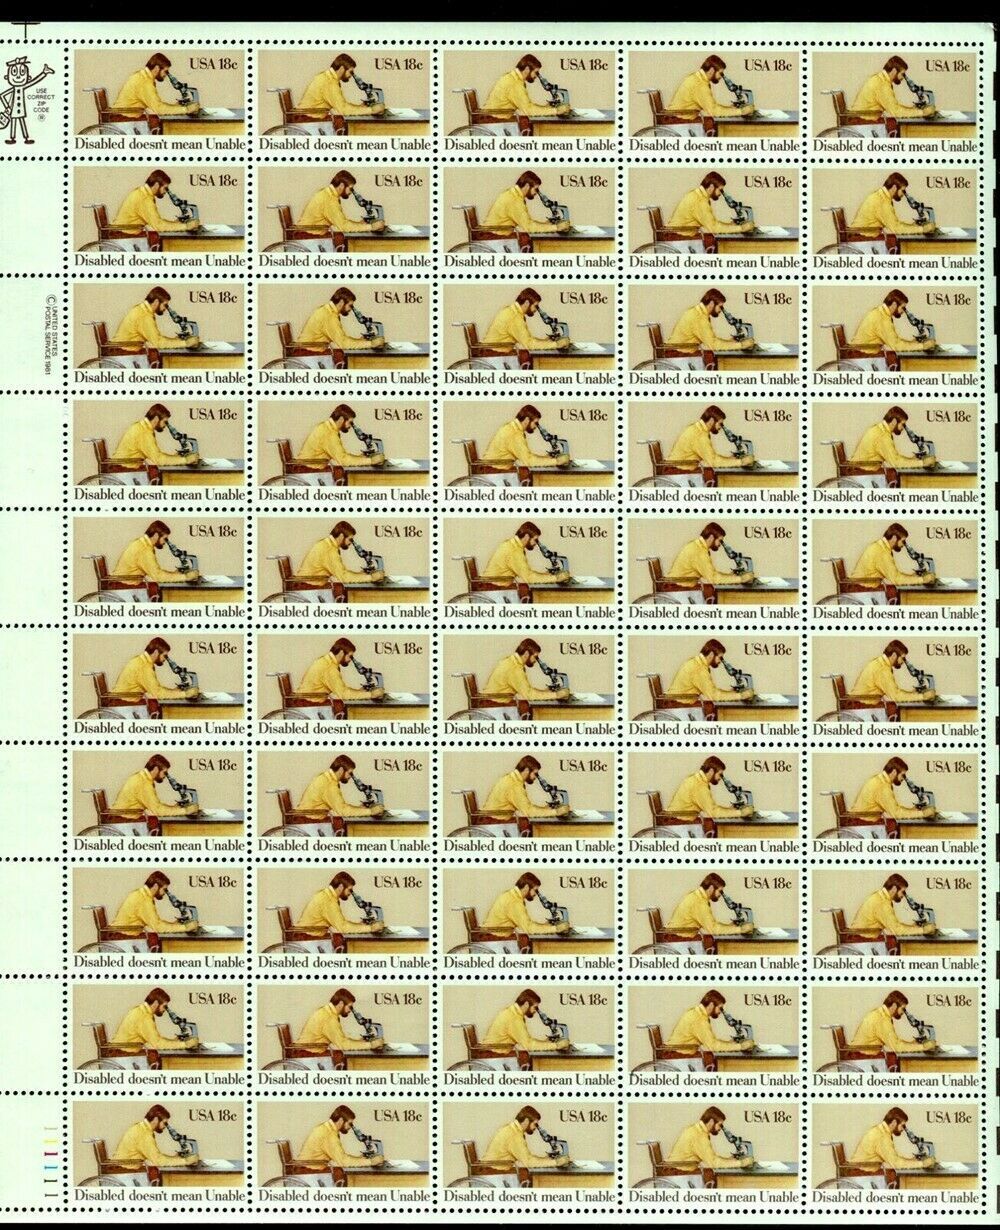 Primary image for Year of Disabled Sheet of Fifty 18 Cent Postage Stamps Scott 1925